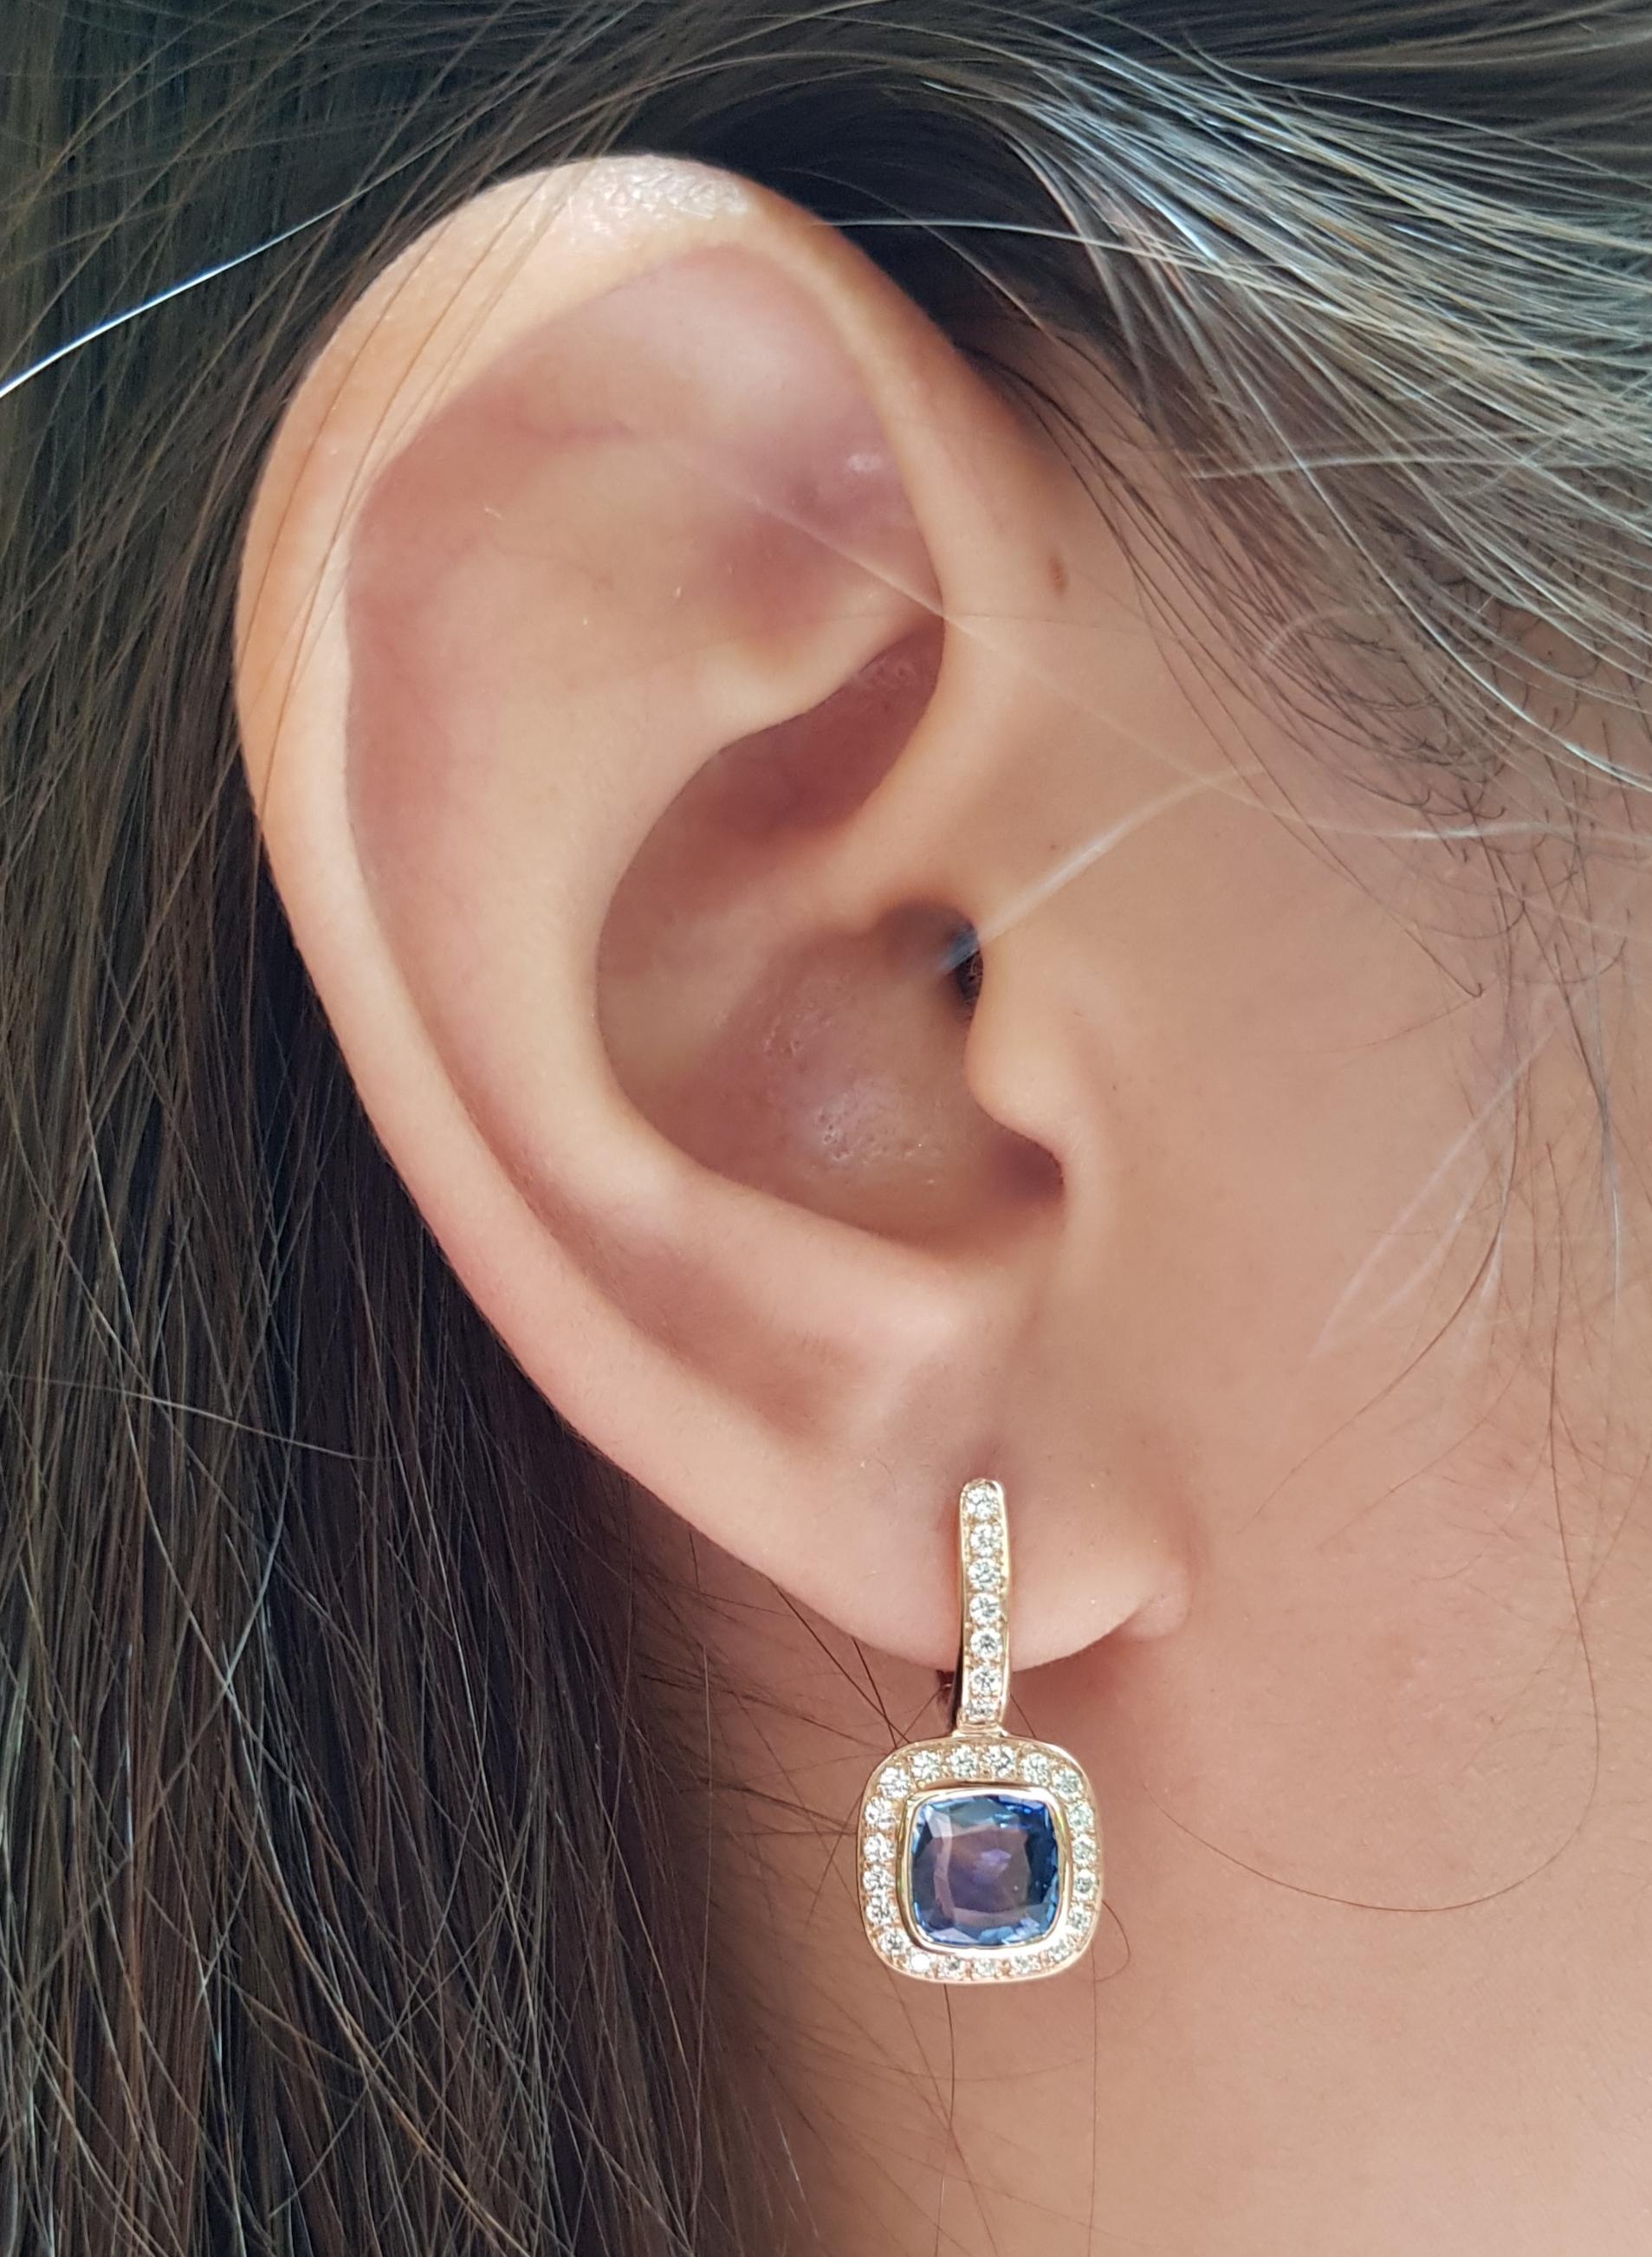 Blue Sapphire 2.89 carats with Diamond 0.47 carat Earrings set in 18 Karat Rose Gold Settings

Width:  1.0 cm 
Length: 2.5 cm
Total Weight: 4.69 grams

